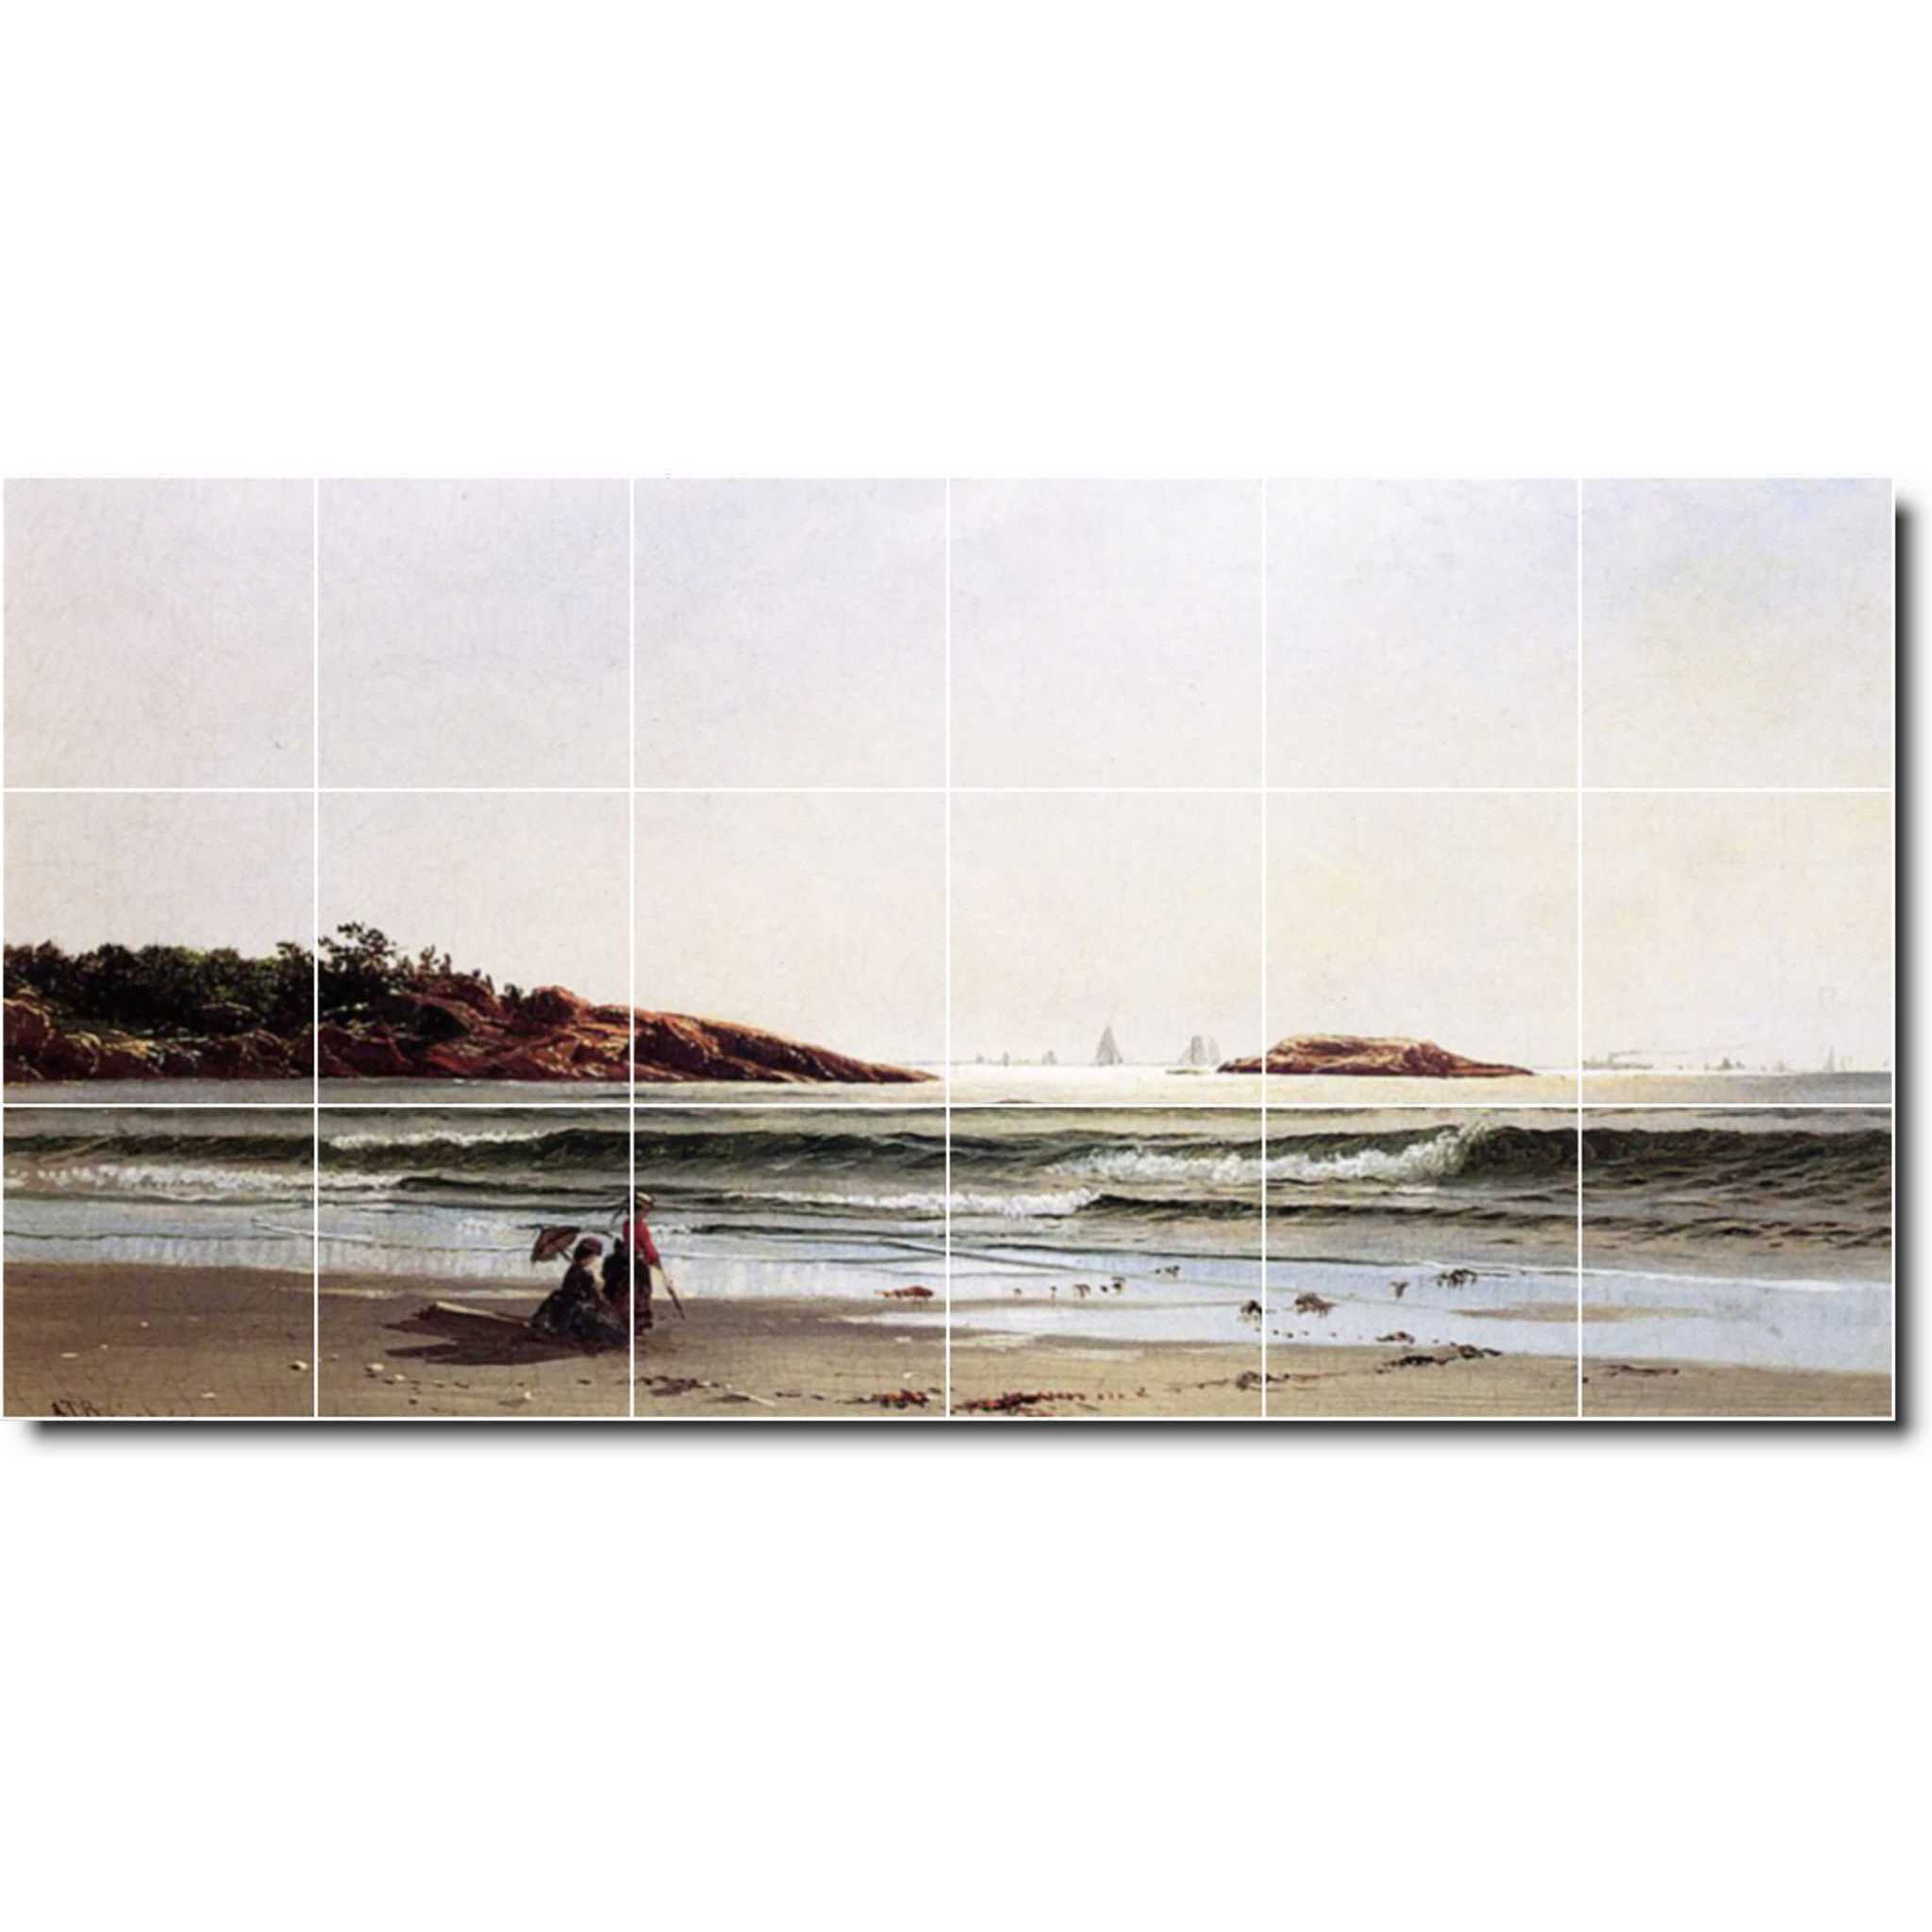 alfred bricher waterfront painting ceramic tile mural p01044